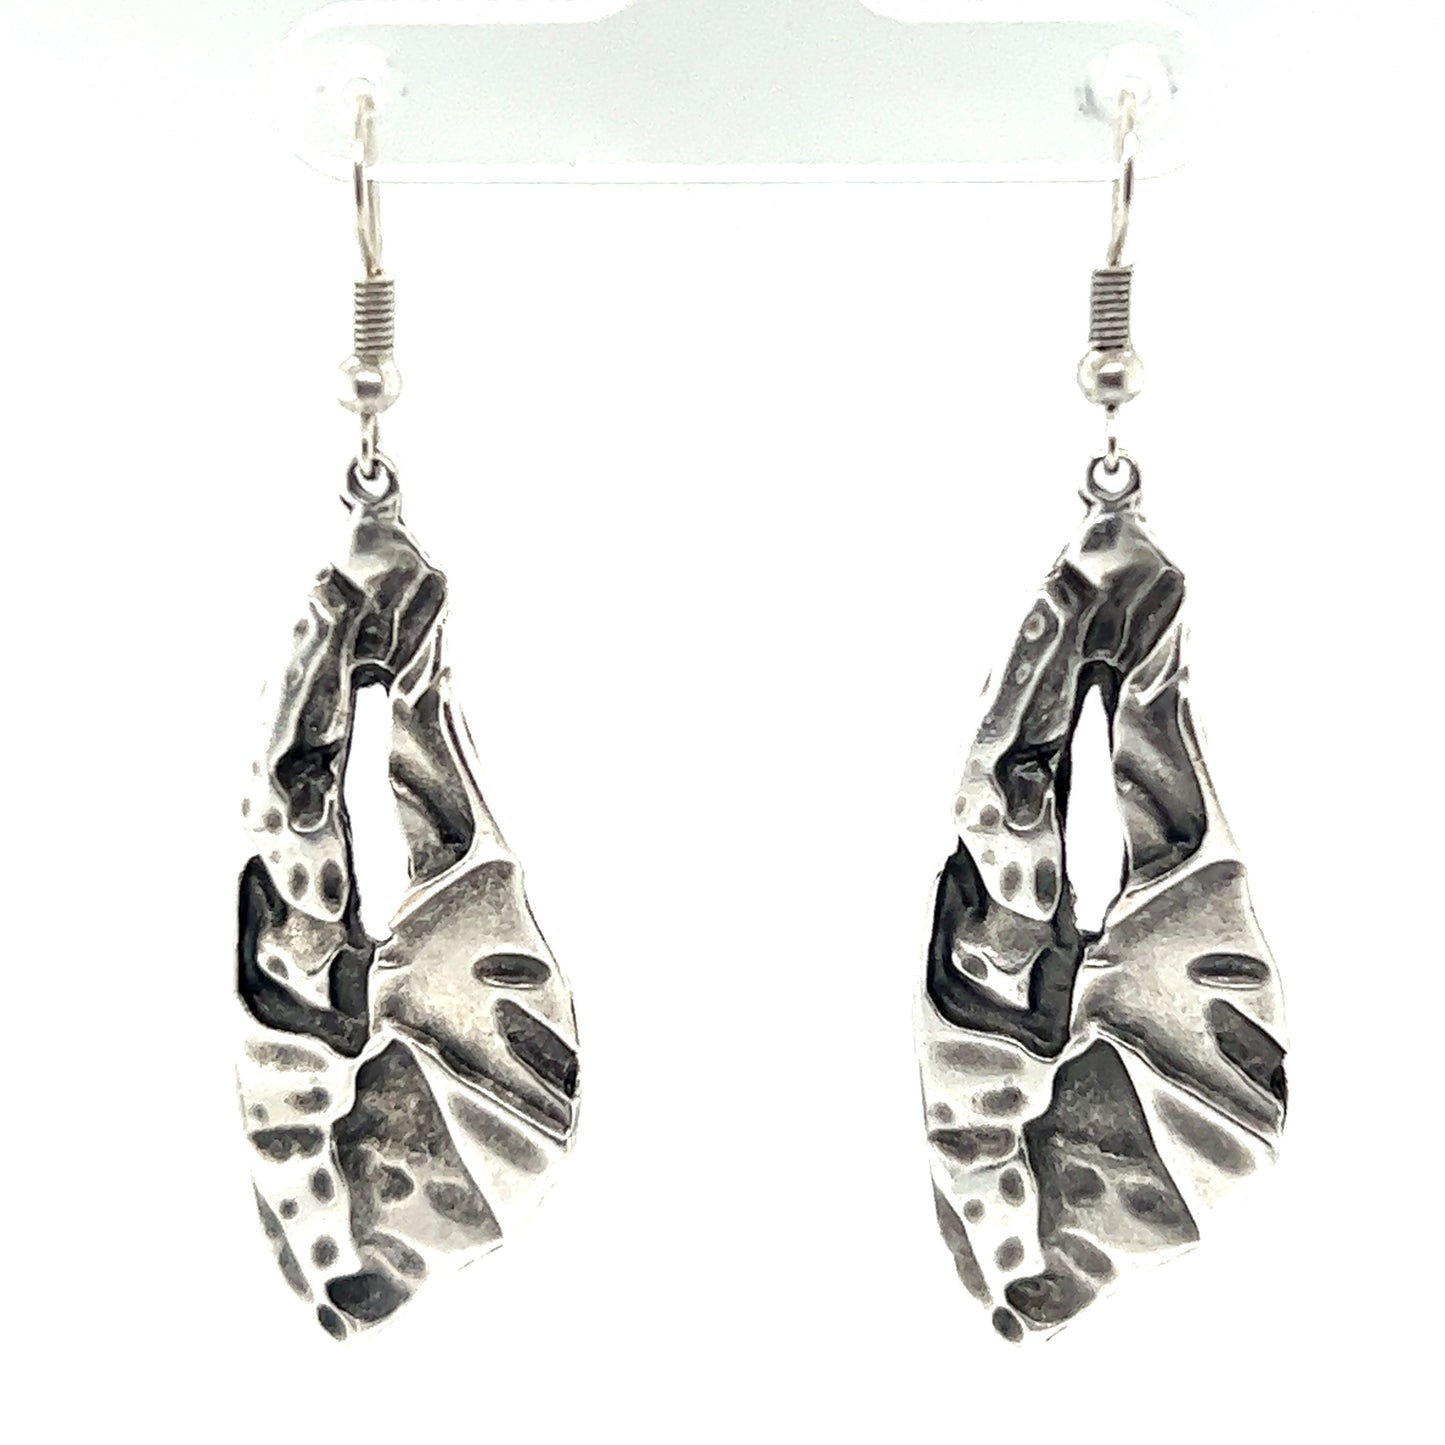 
                  
                    A pair of trendy and boho-chic Triangular Boho Statement Earrings adorned with leaves, making them the perfect urban boho jewelry accessory.
                  
                